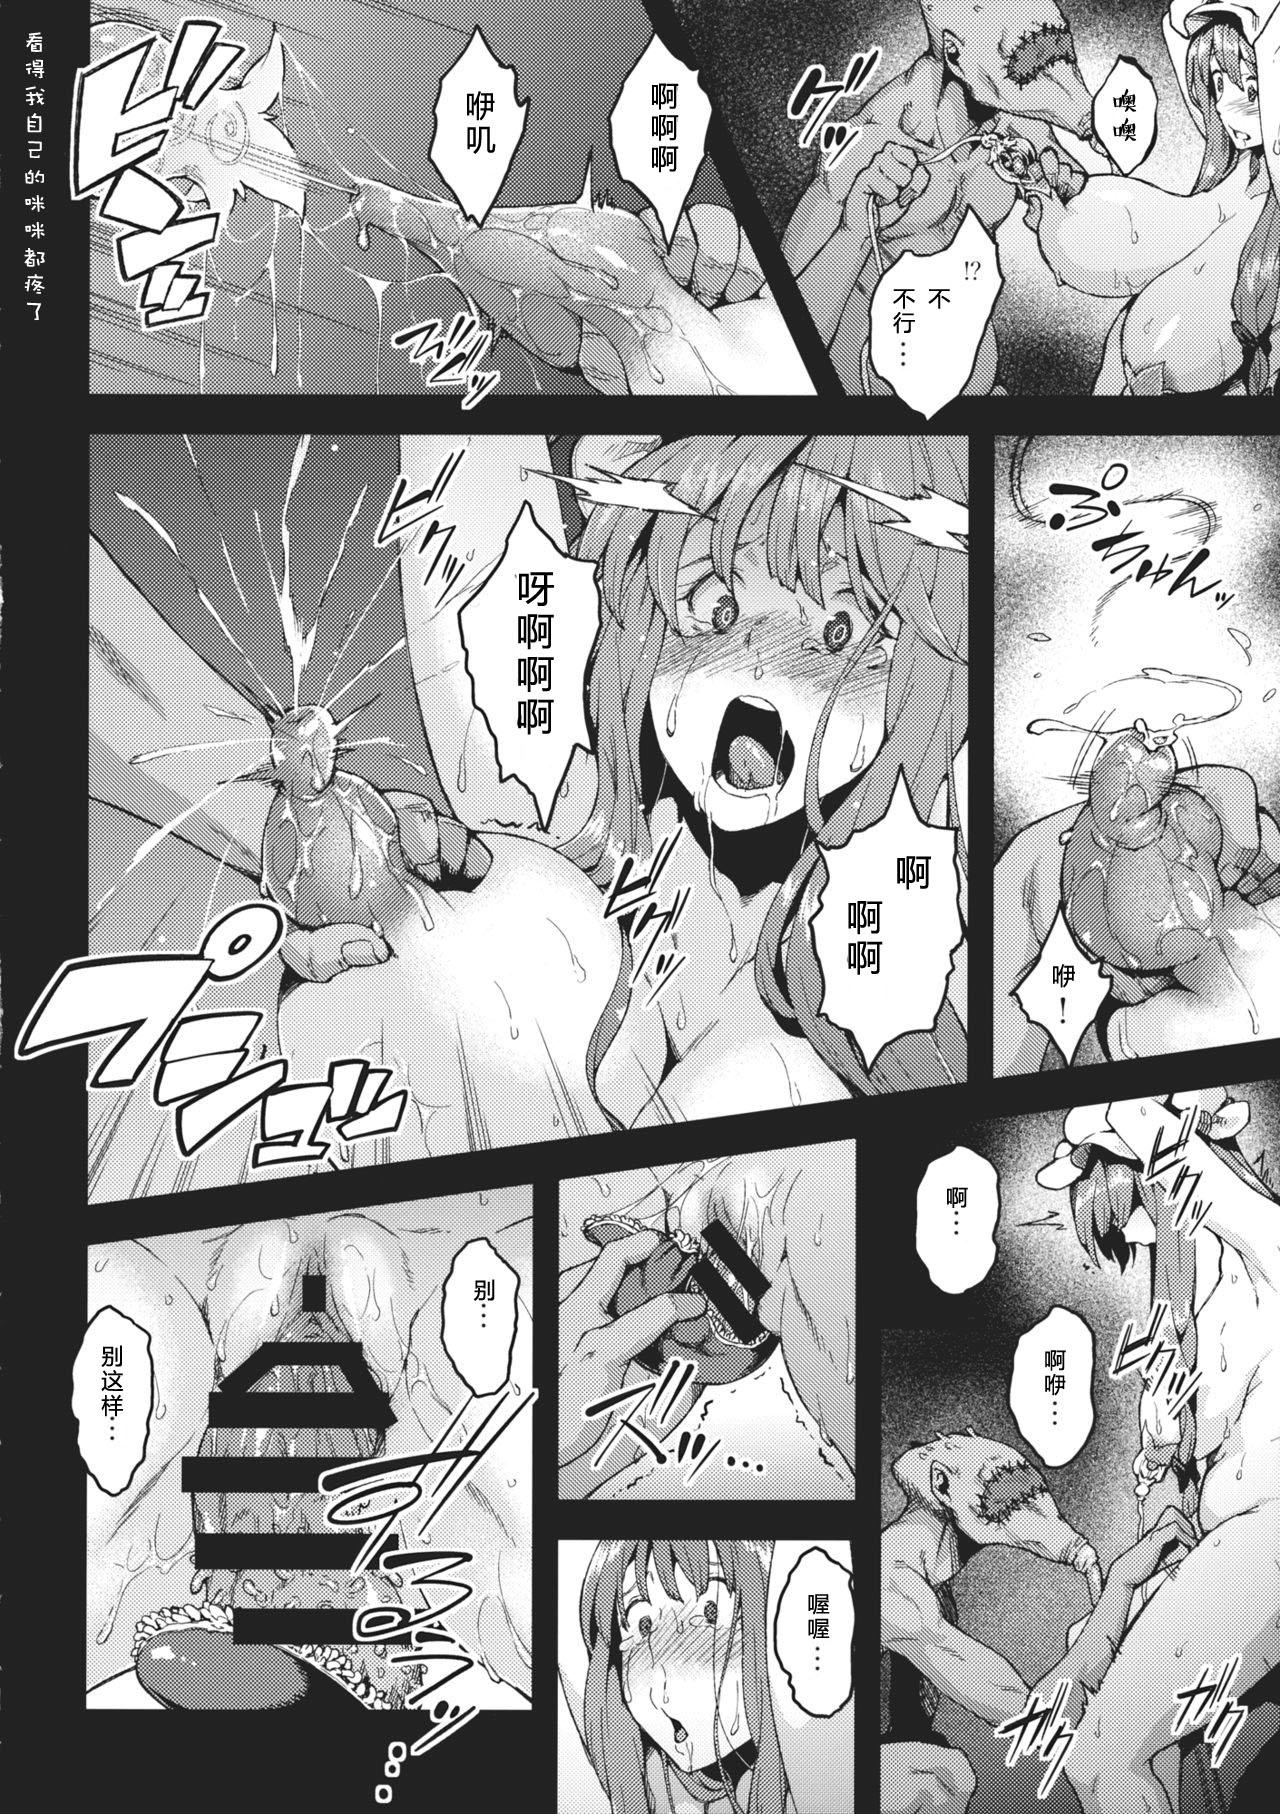 Phat Ass Pache Otoshi after II - Touhou project 4some - Page 7